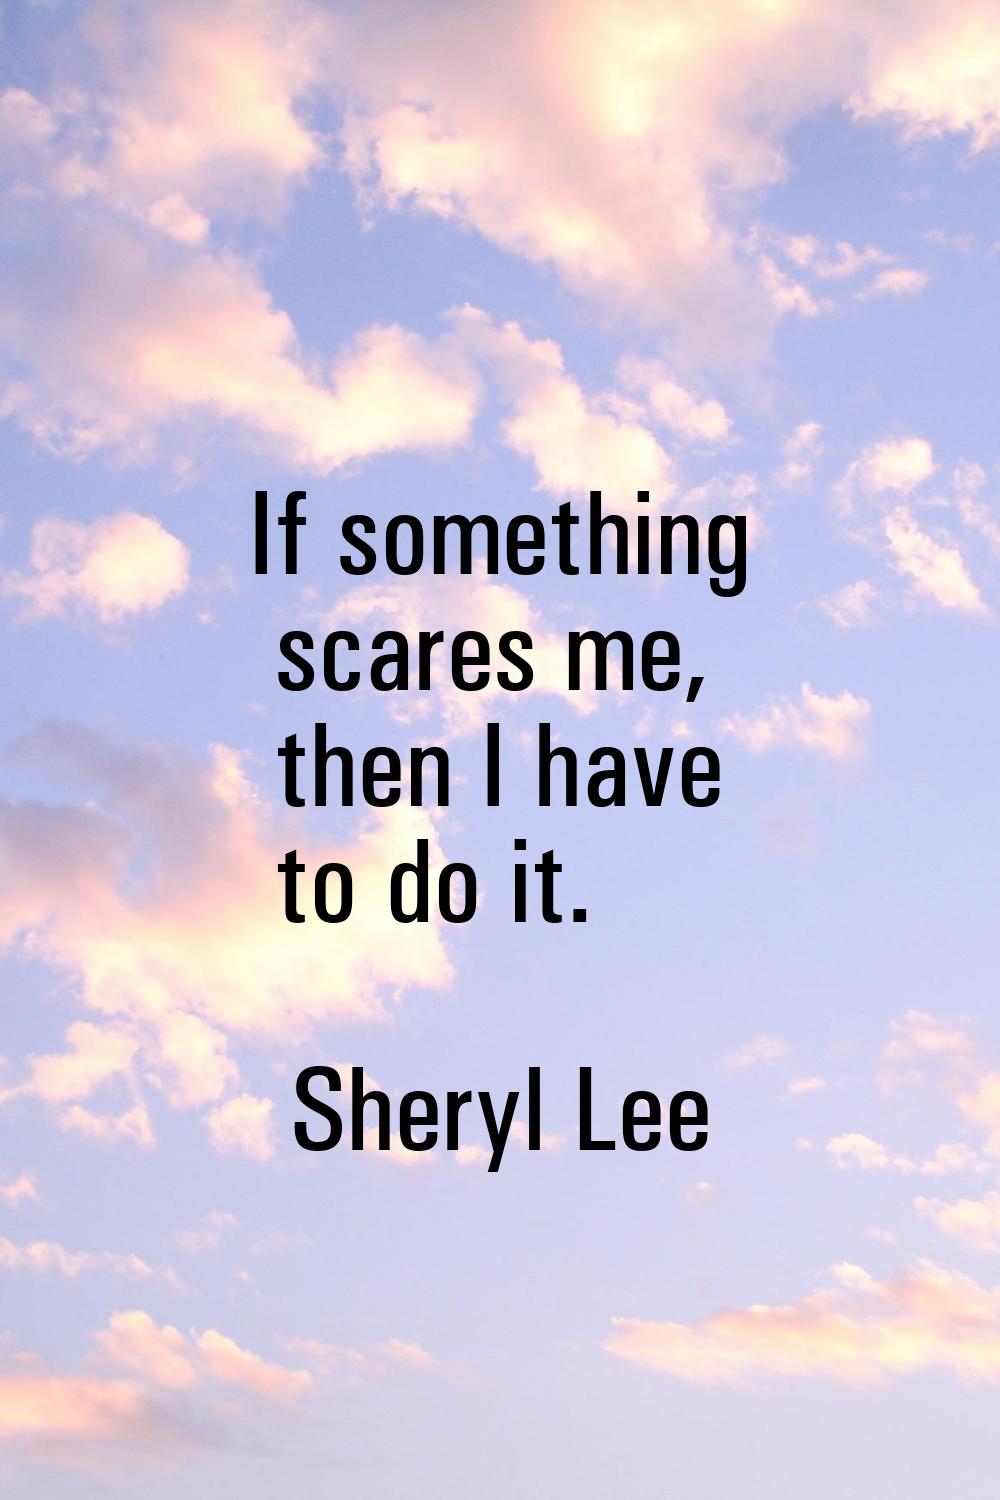 If something scares me, then I have to do it.